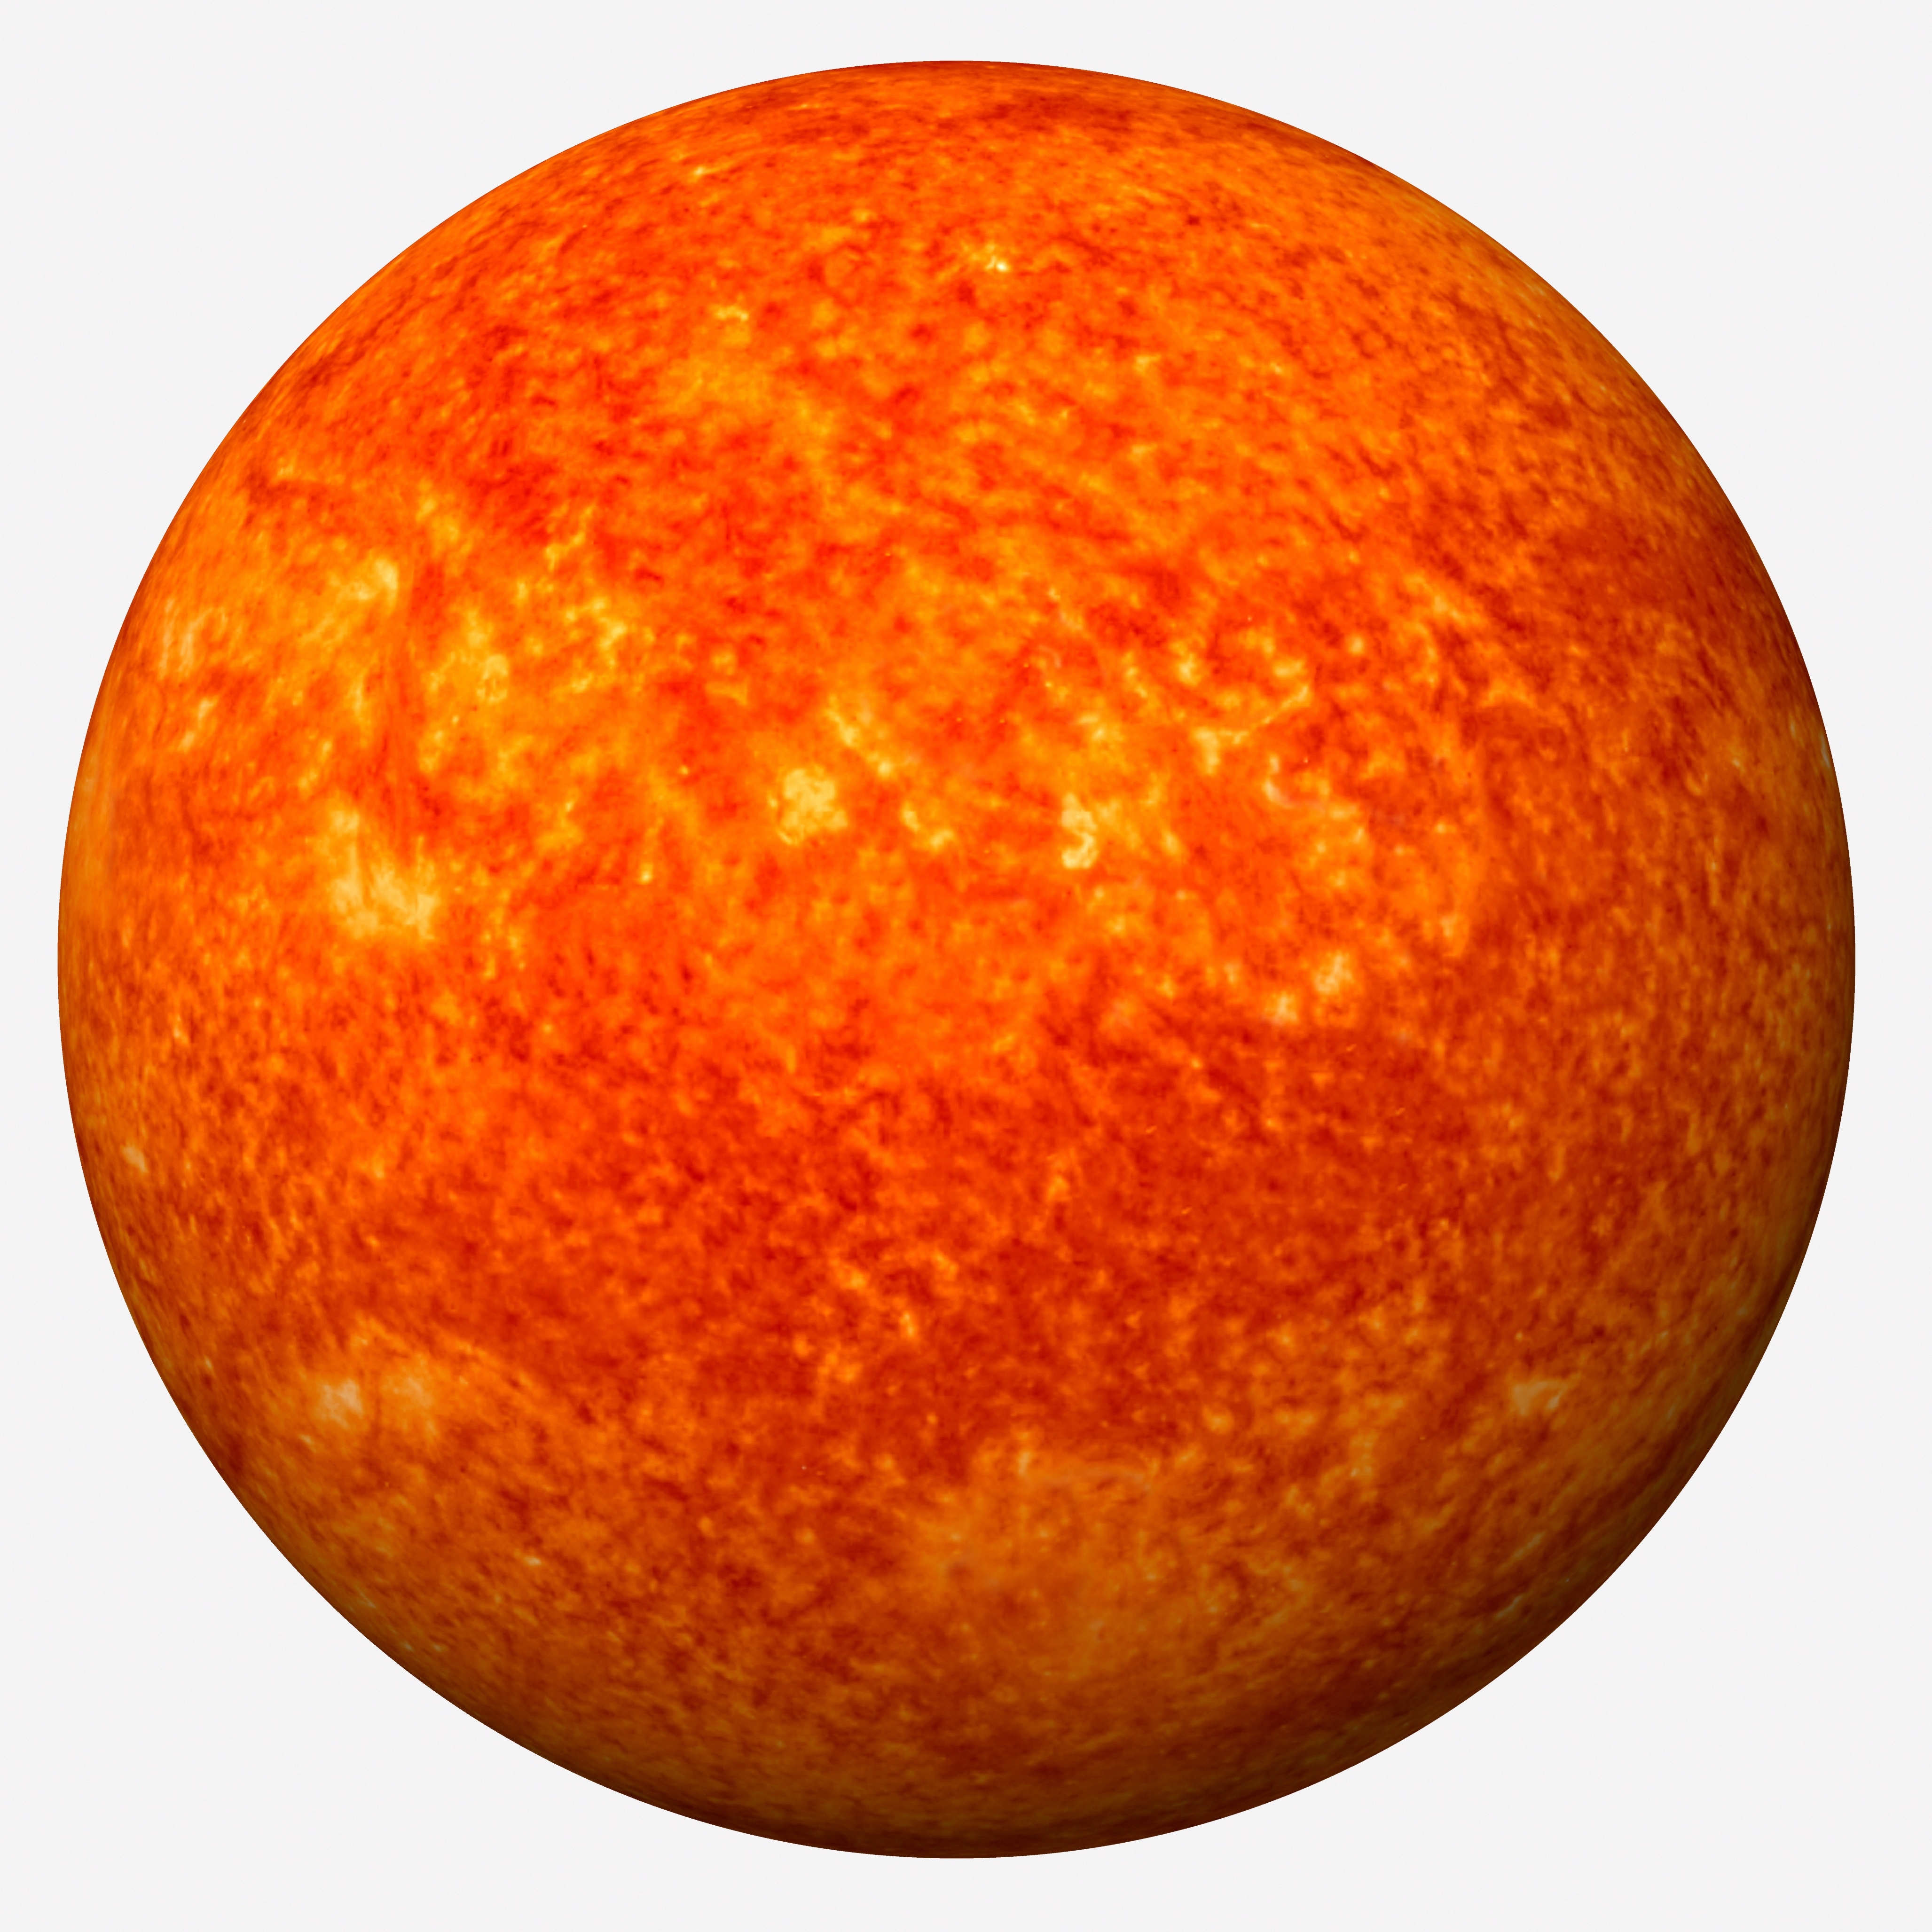 There's a prize hidden inside this red giant (Getty Images)